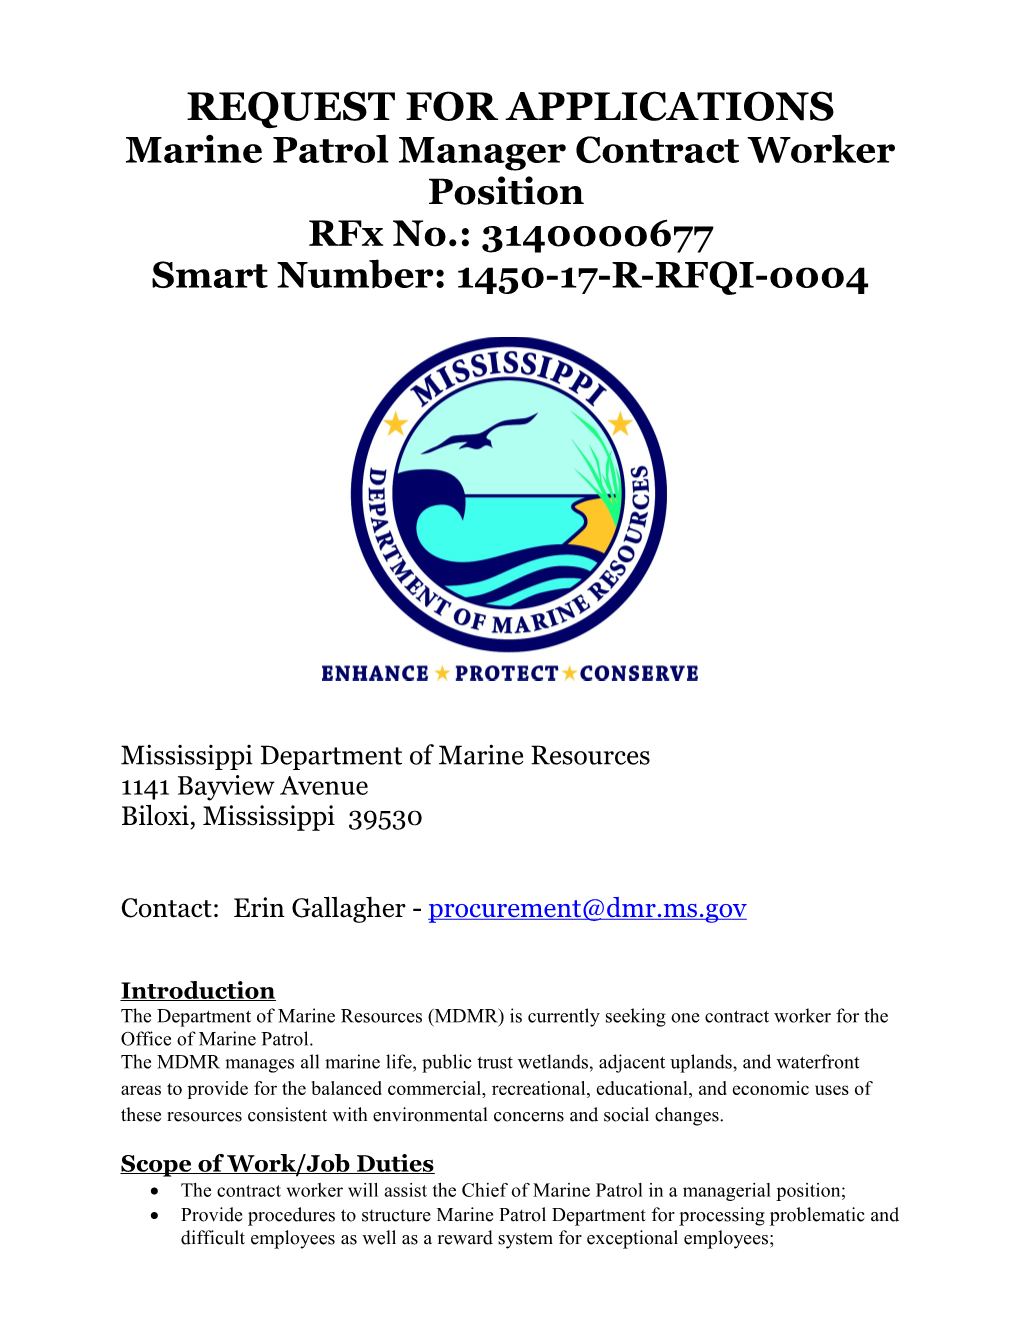 RFA Marine Patrol Manager Contract Worker